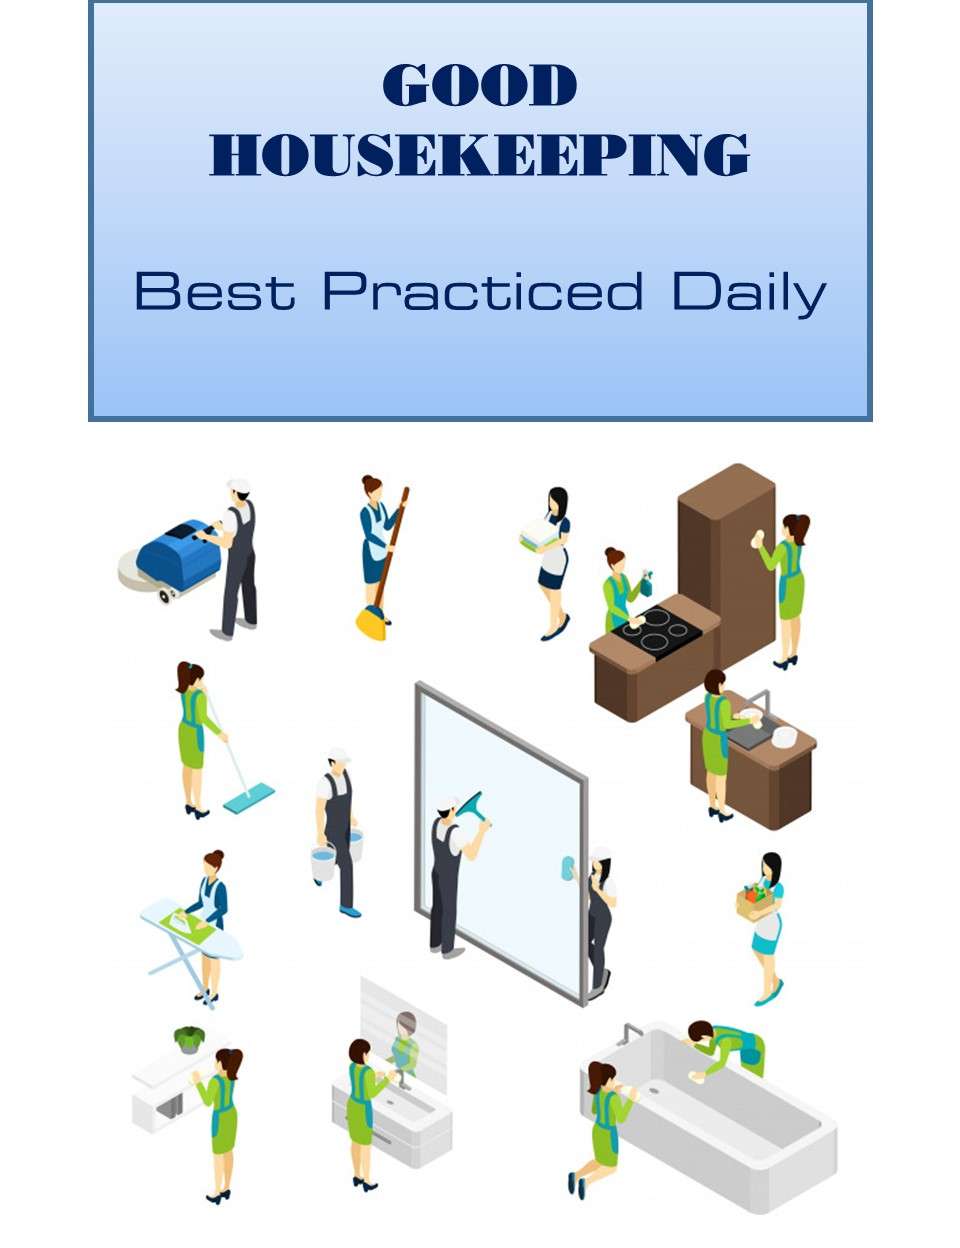 Good Housekeeping in the workplace